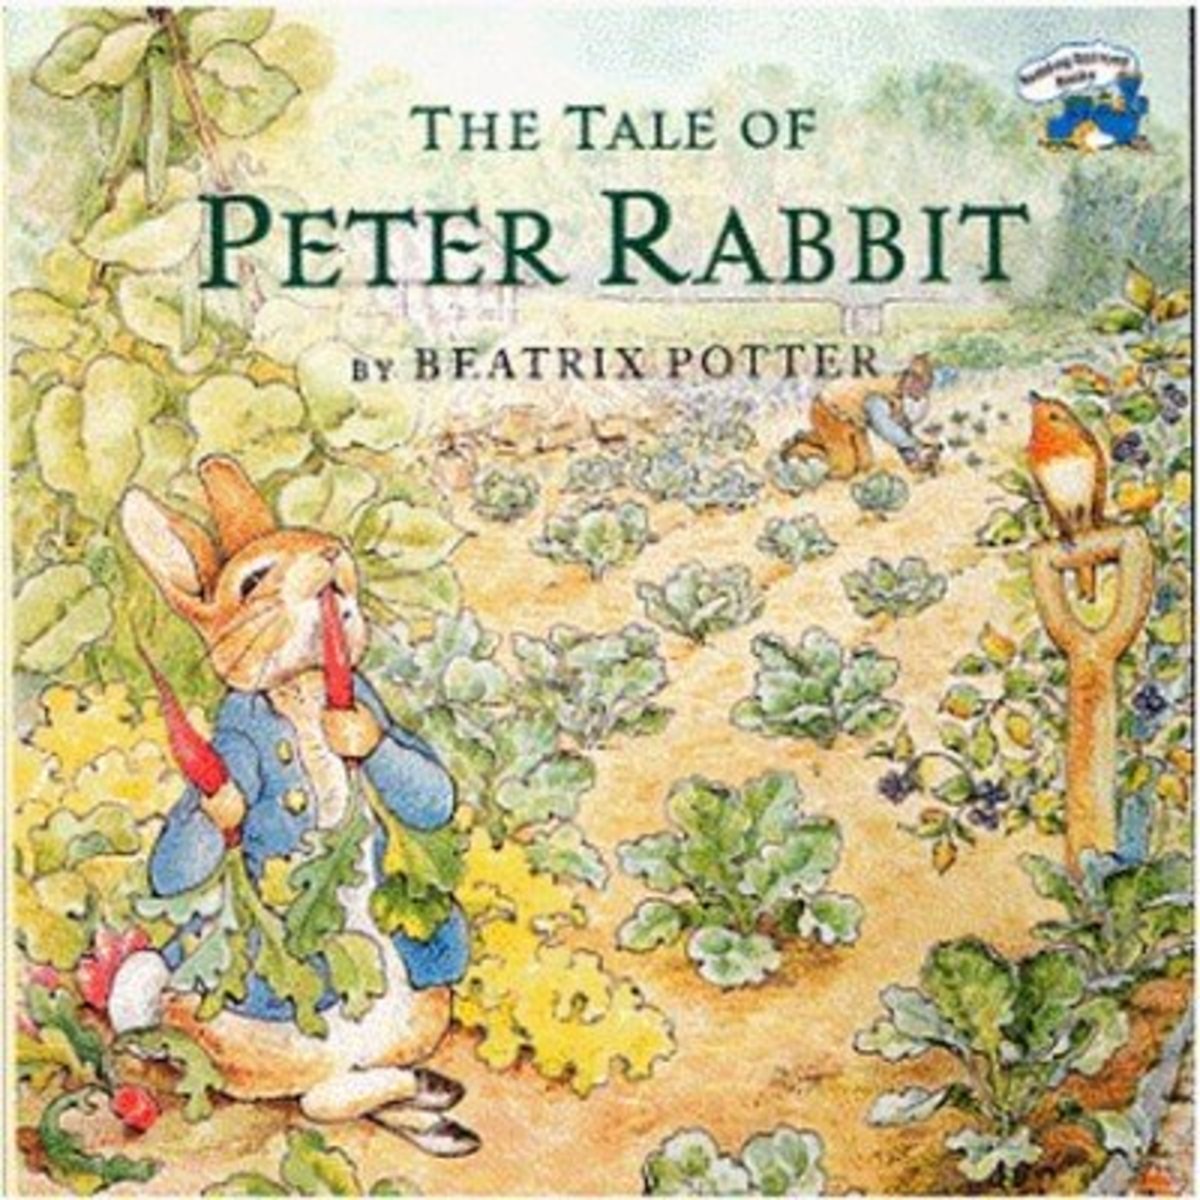 Image result for author beatrix potter in 1943